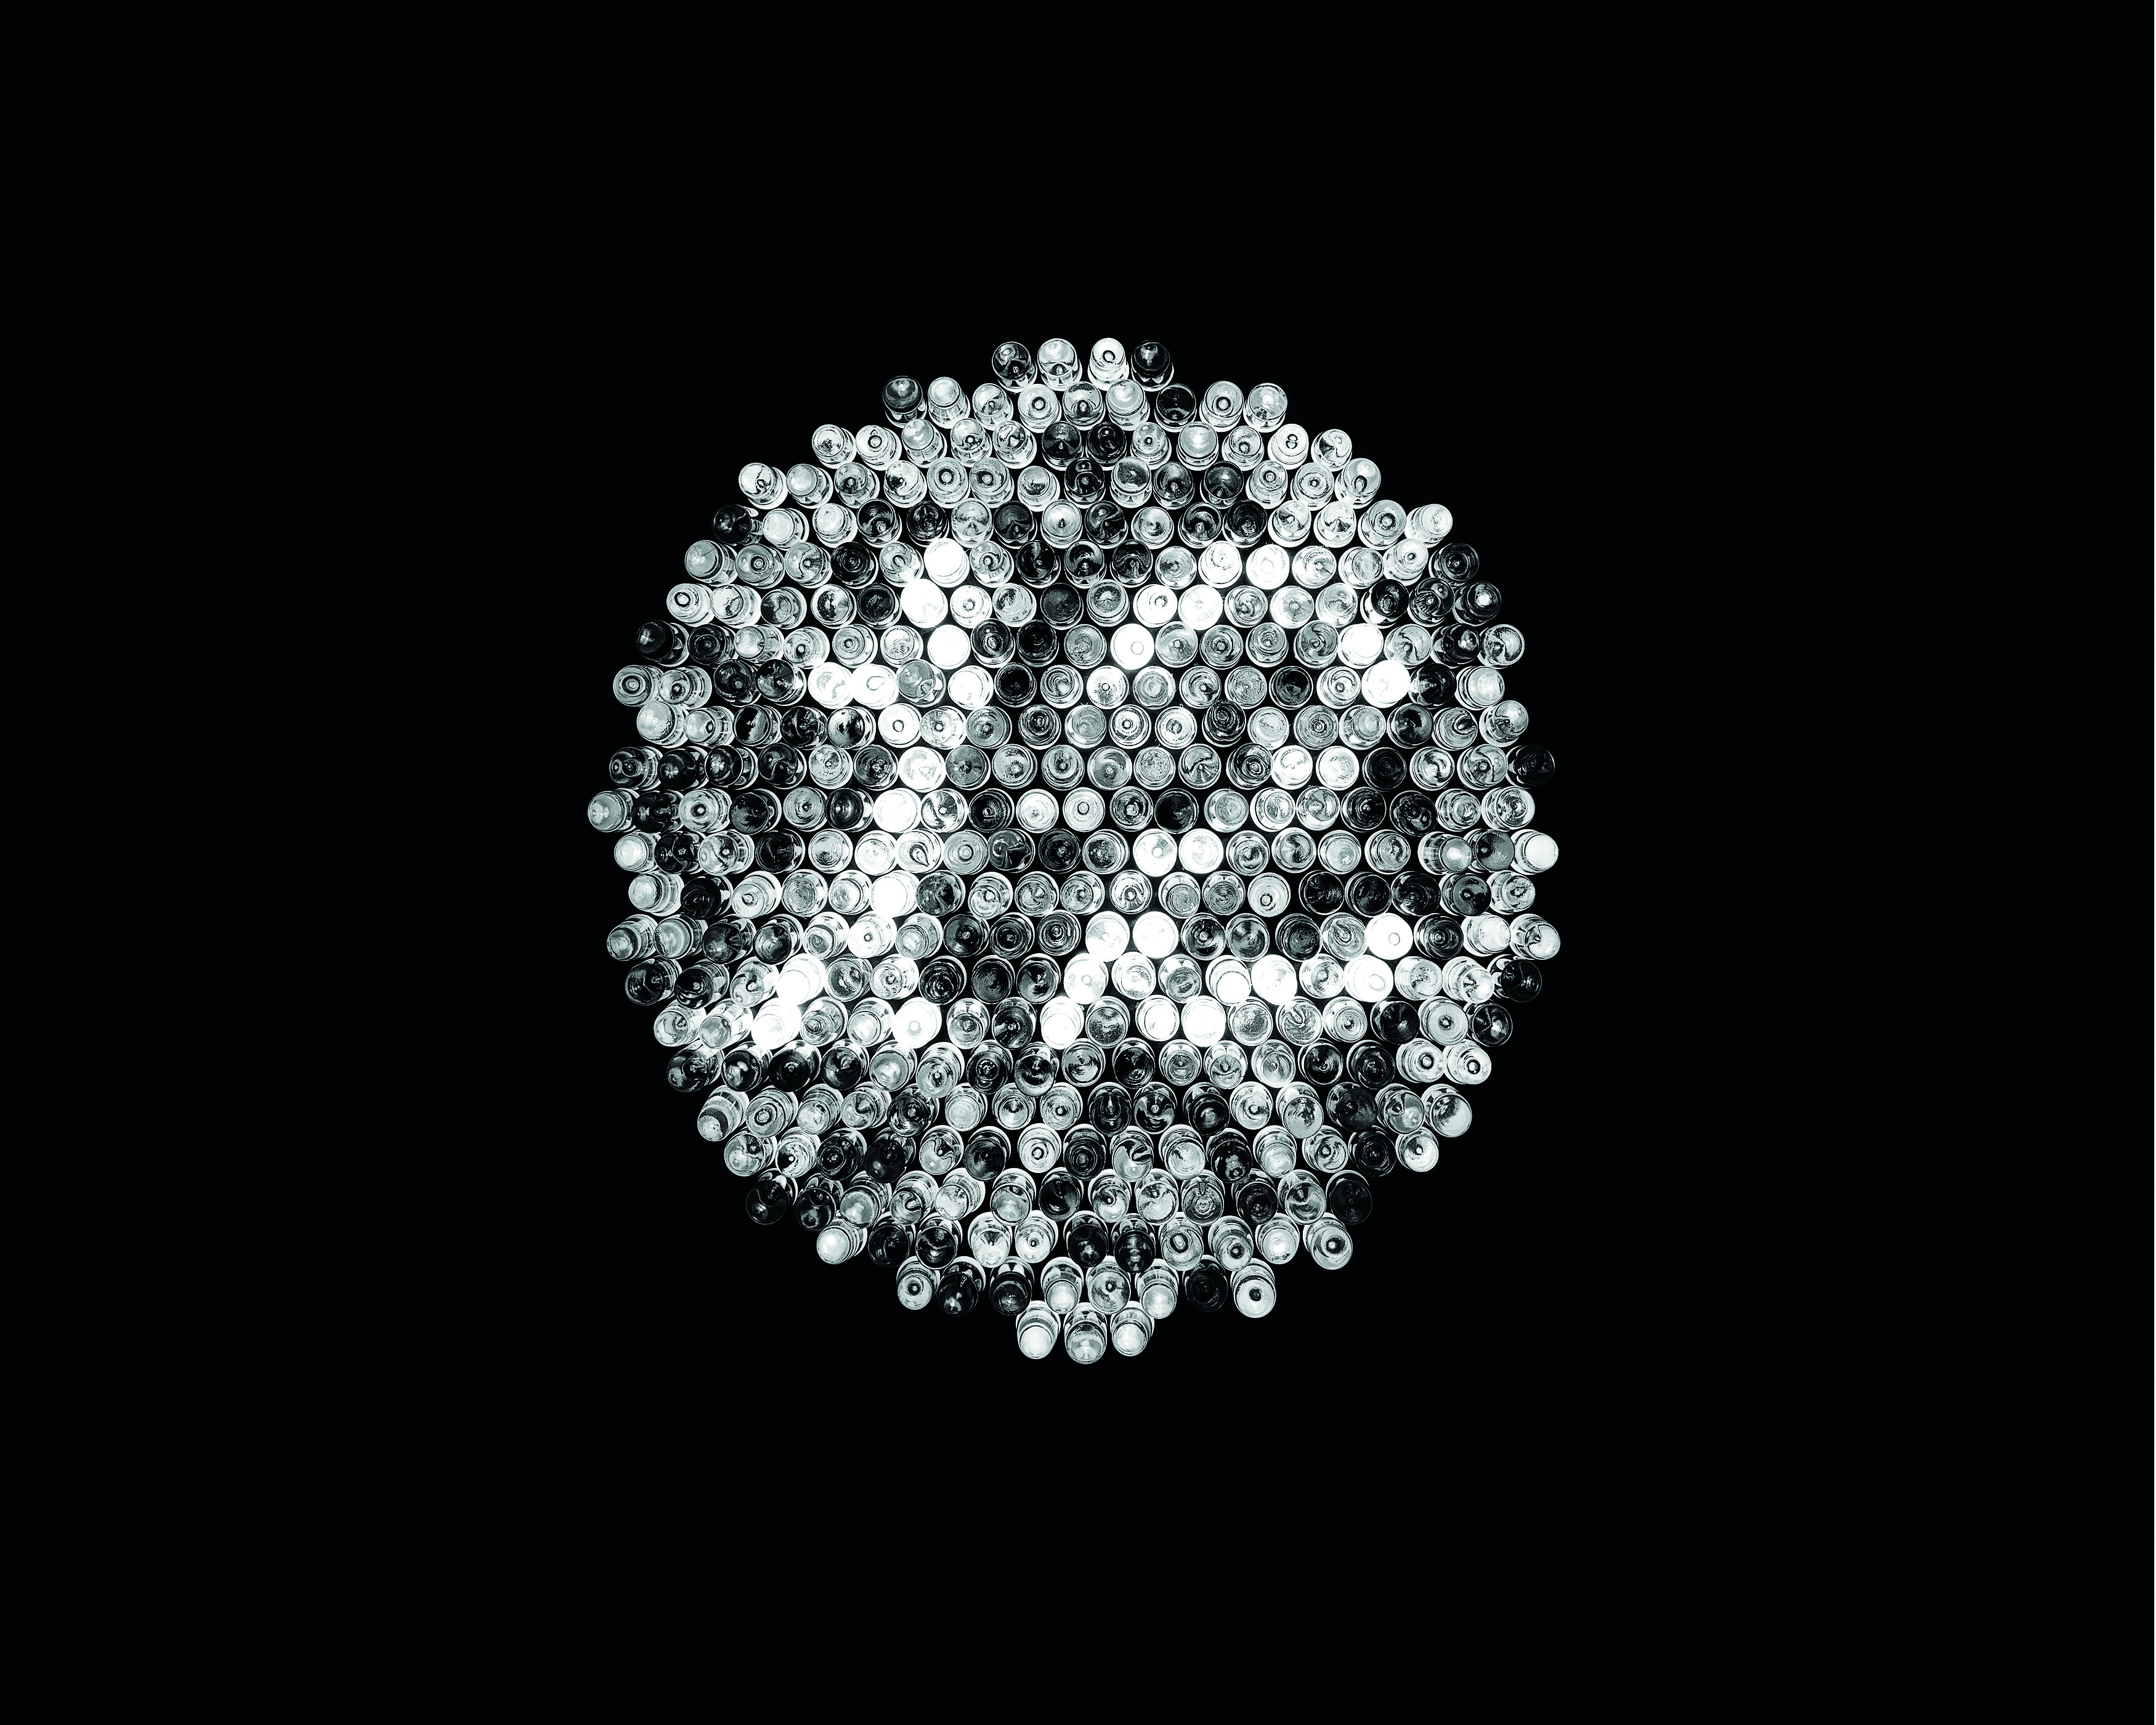 Matthew Gamber, Ishihara Test in Light-Brite from the series Any Color You Like.